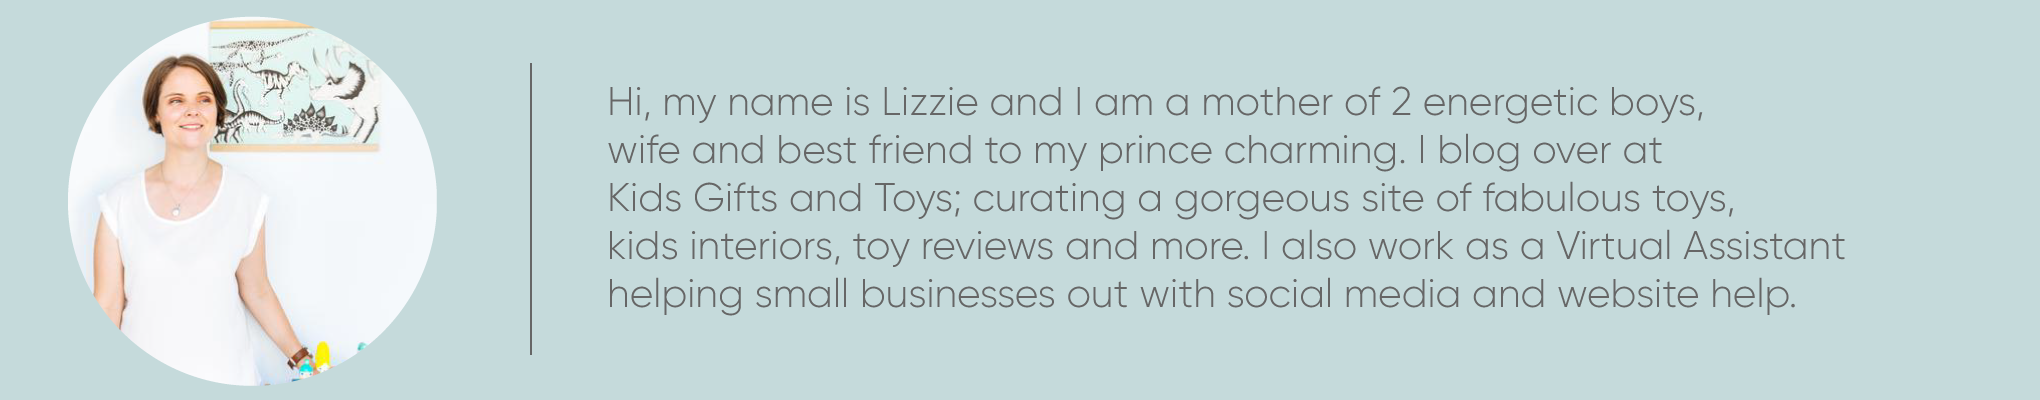 Lizzie Wall Kids Gifts and Toys Blogger for Tiny Paper Co. 